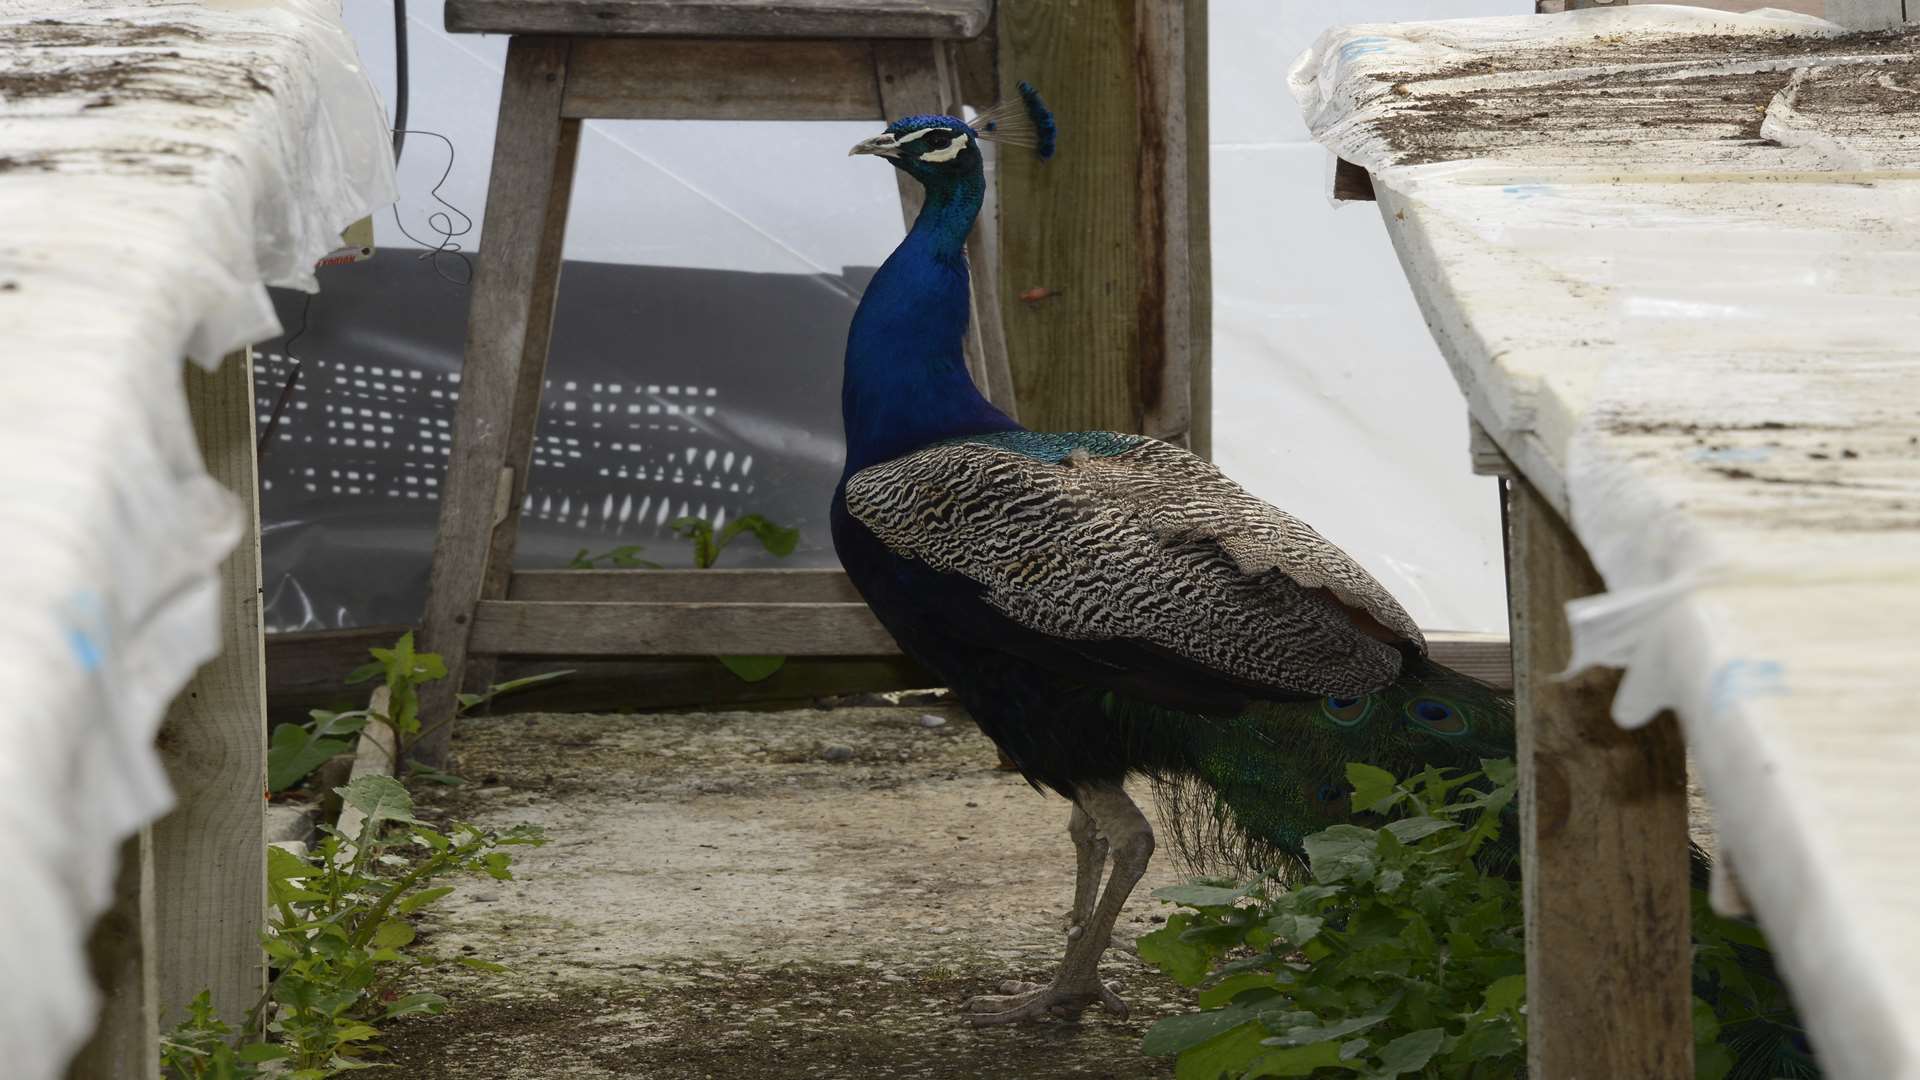 The peacock made itself at home in a polytunnel. Picture: Paul Amos